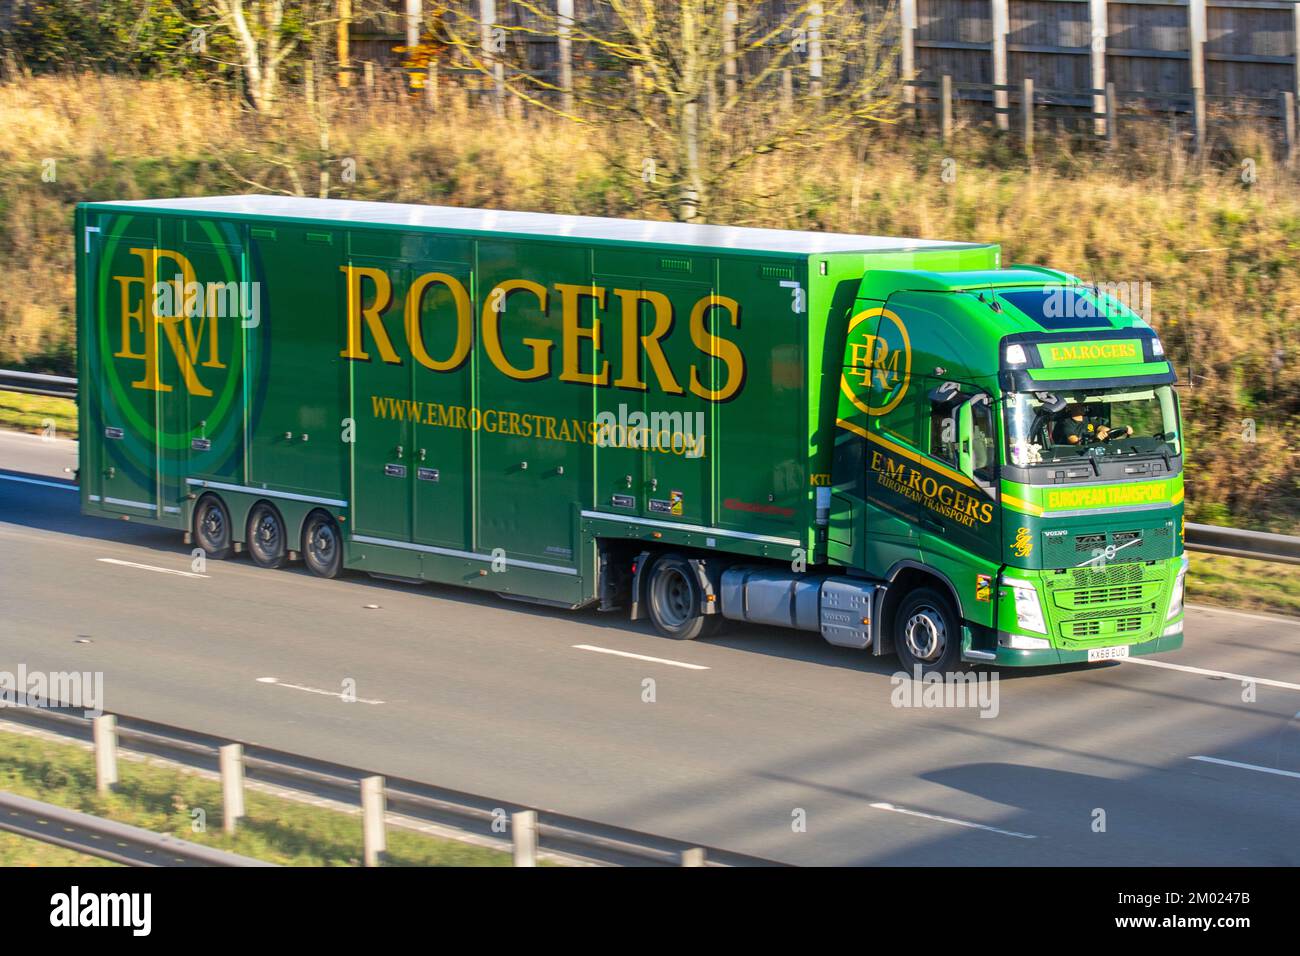 ERM. E.M. ROGERS, E.M. ROGERS (TRANSPORT) LIMITED with Kassbohrer flatbed trailers. Delivery truck on the M6 motorway, UK Stock Photo